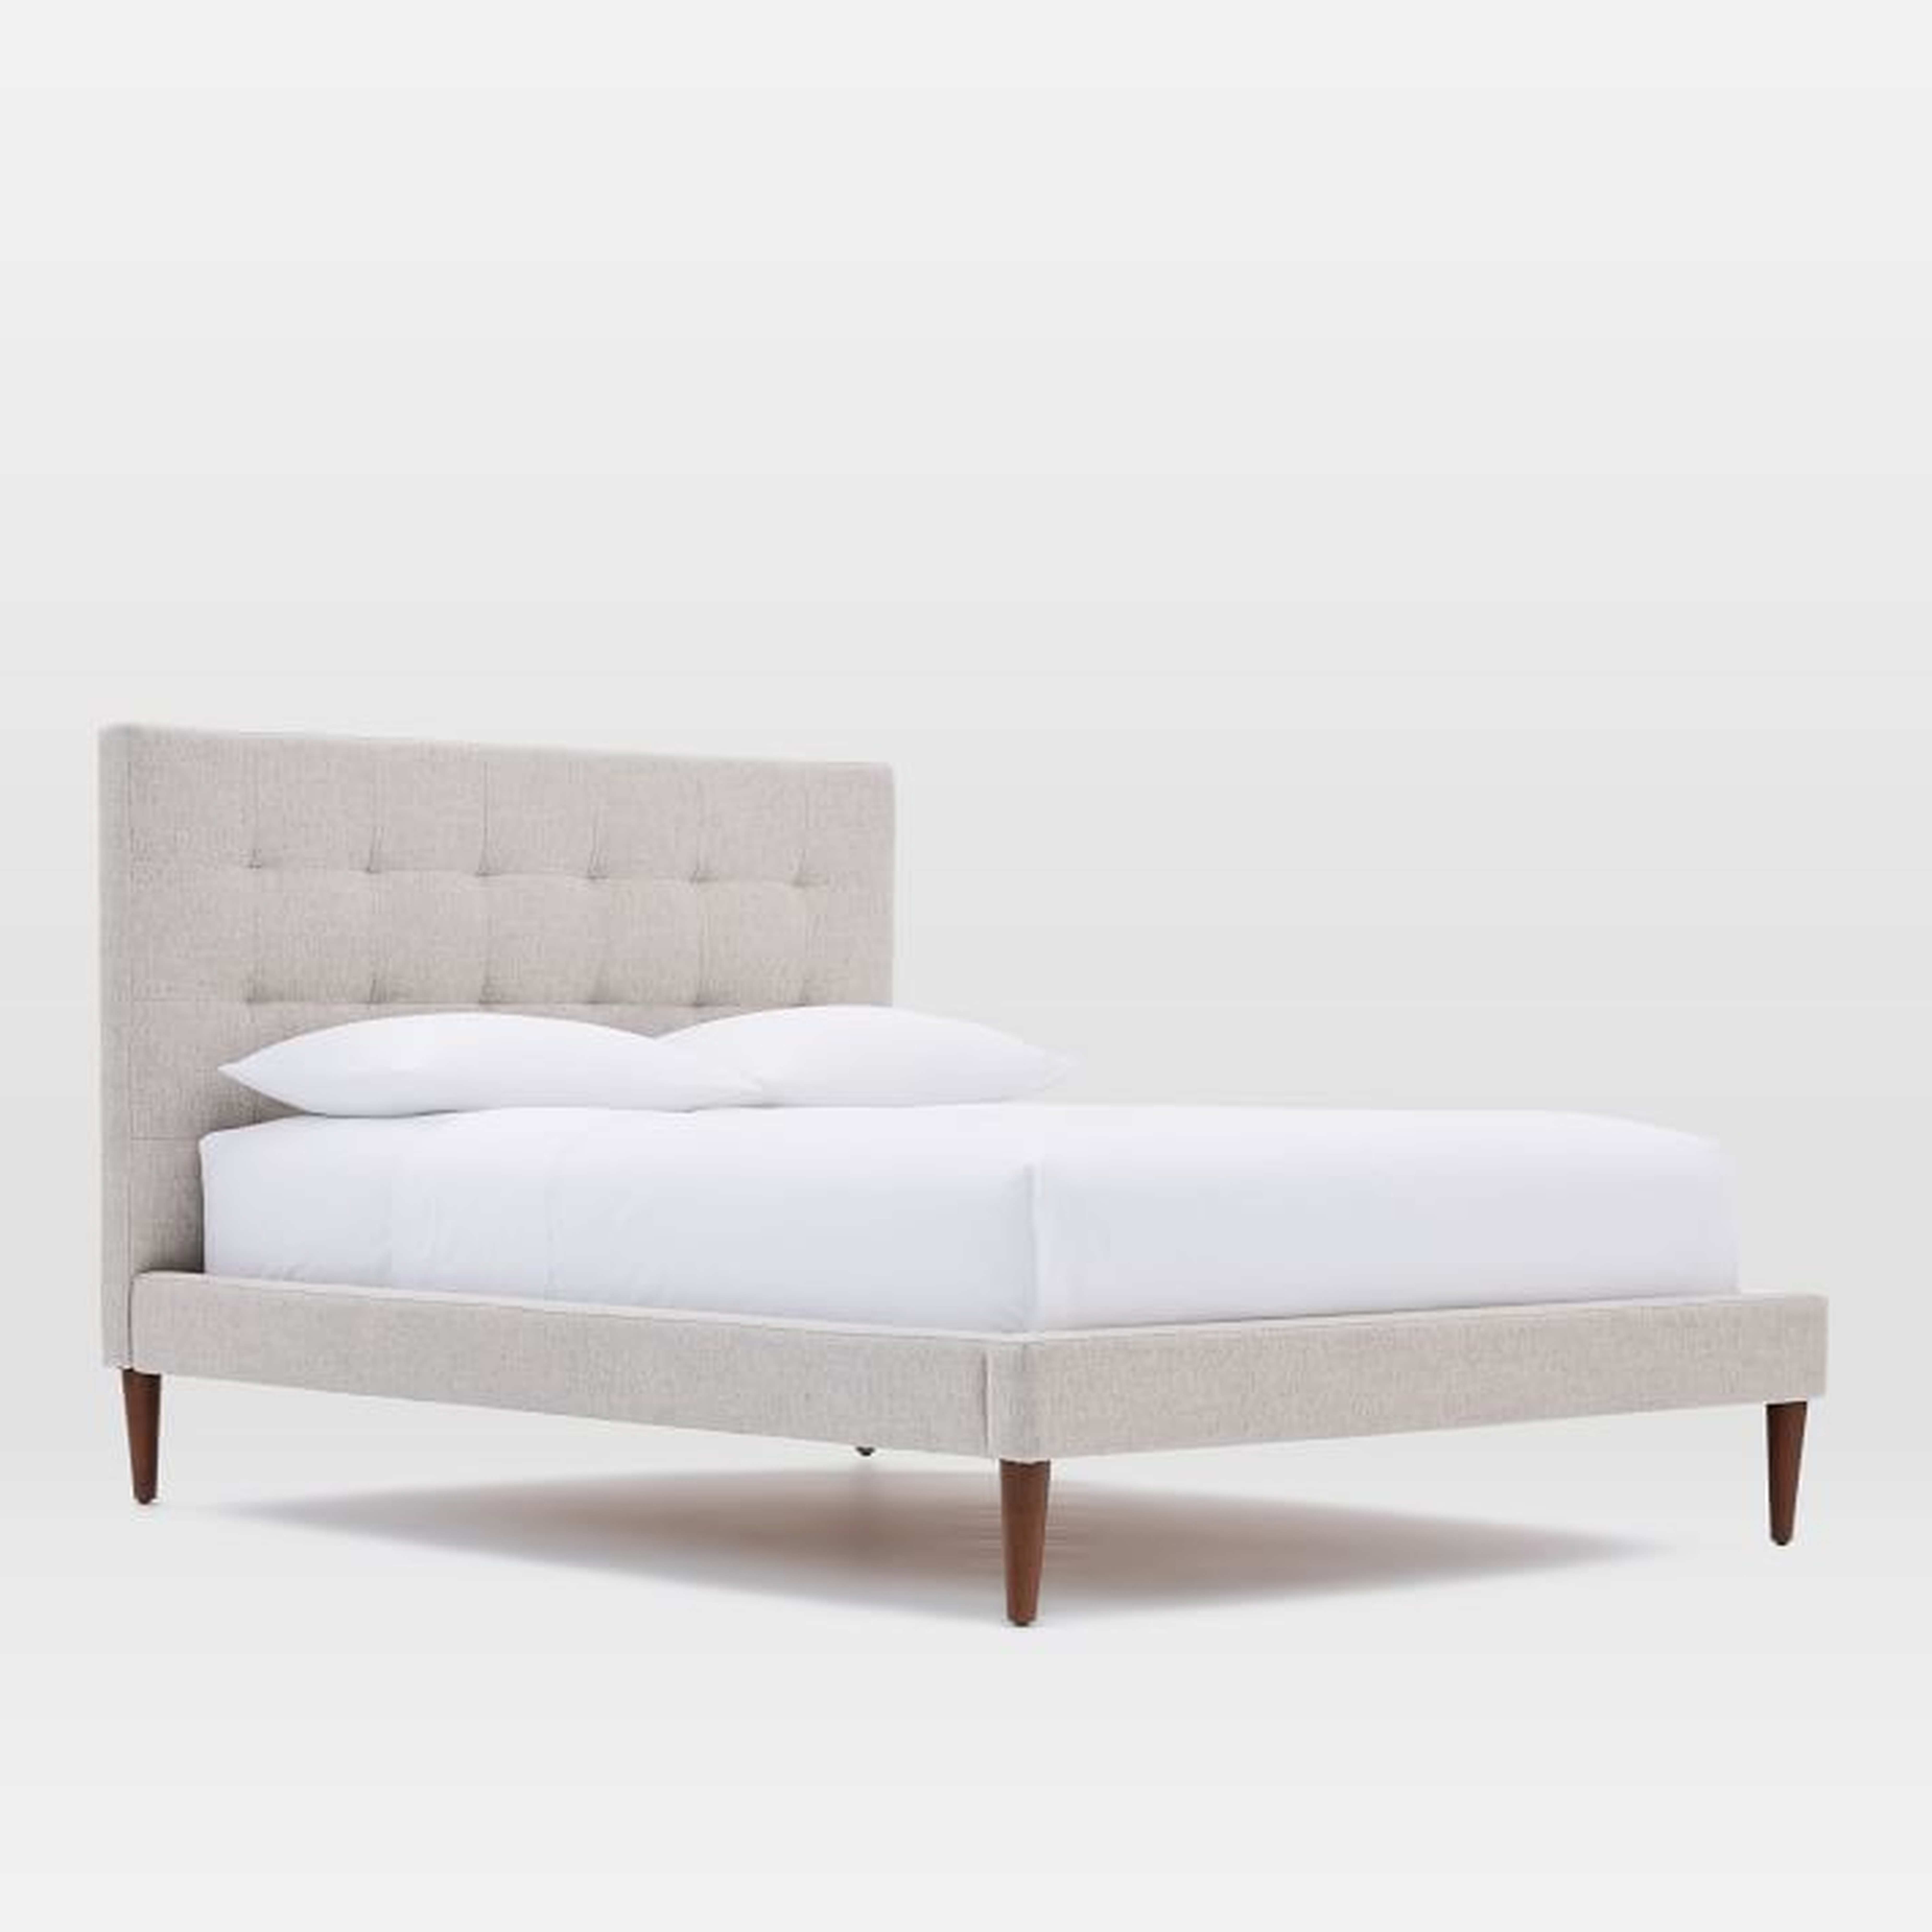 Grid-Tufted Upholstered Tapered Leg Bed - King - Twill, Stone - West Elm